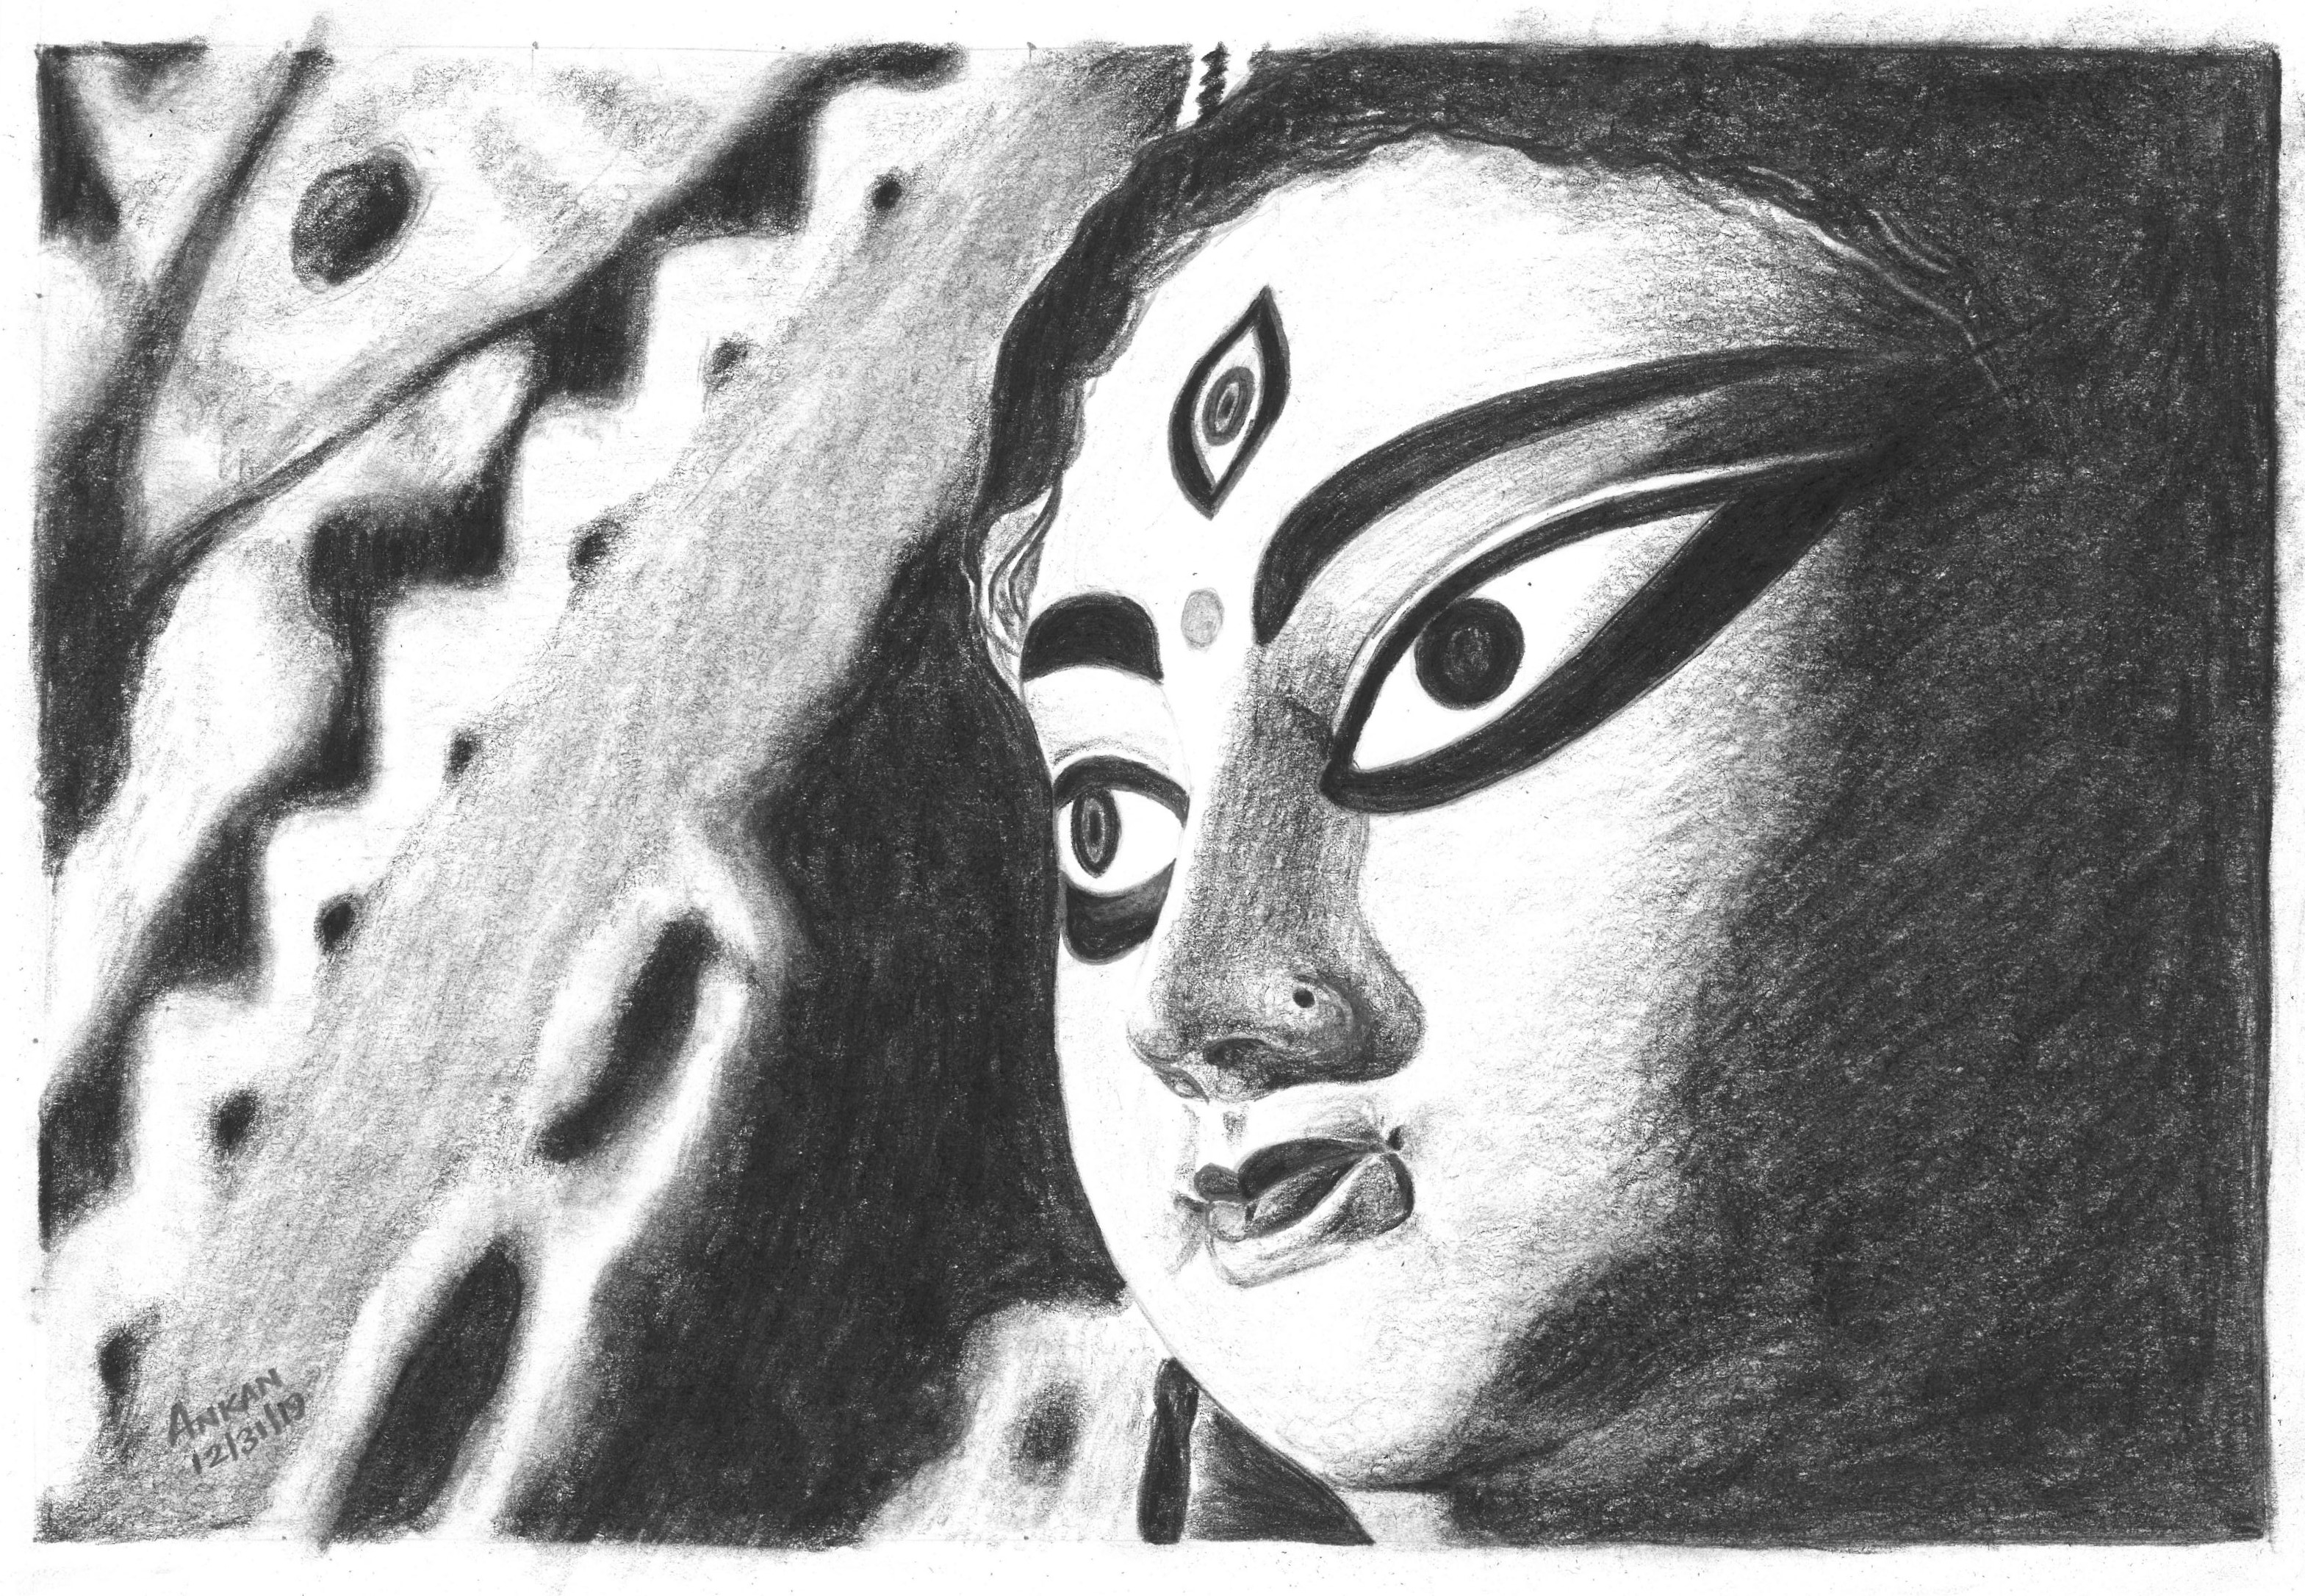 How to draw Maa durga face pencil sketch for beginners  step by step  drawing  MaaDurga  YouTube  Drawings Step by step drawing Pencil  sketches of faces